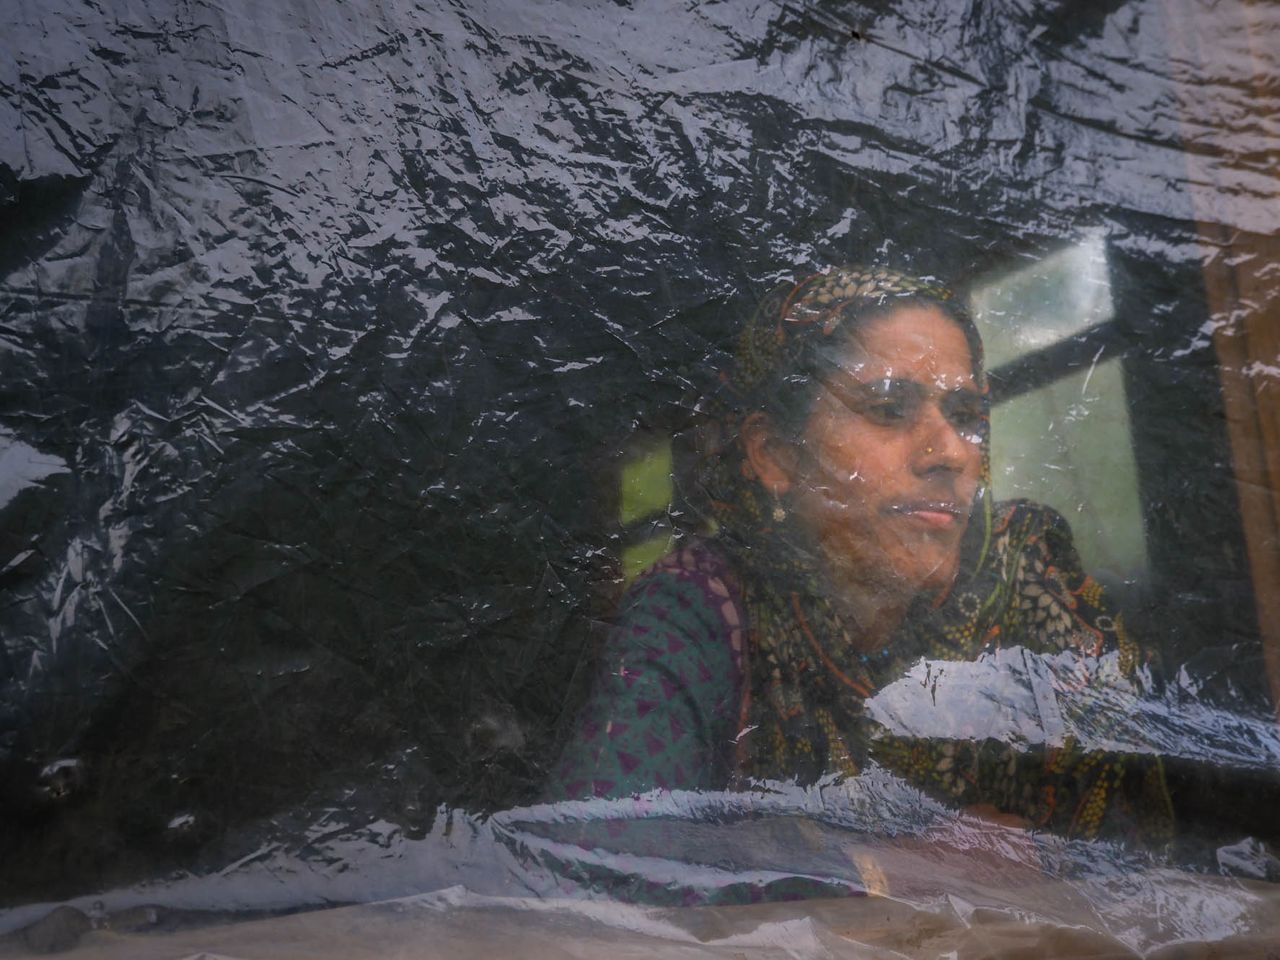 Naseema looks through the window of her house that is covered with a polythene owing to poverty, in Faqir Gujri area of central Kashmir. Date: 19 April,2022.